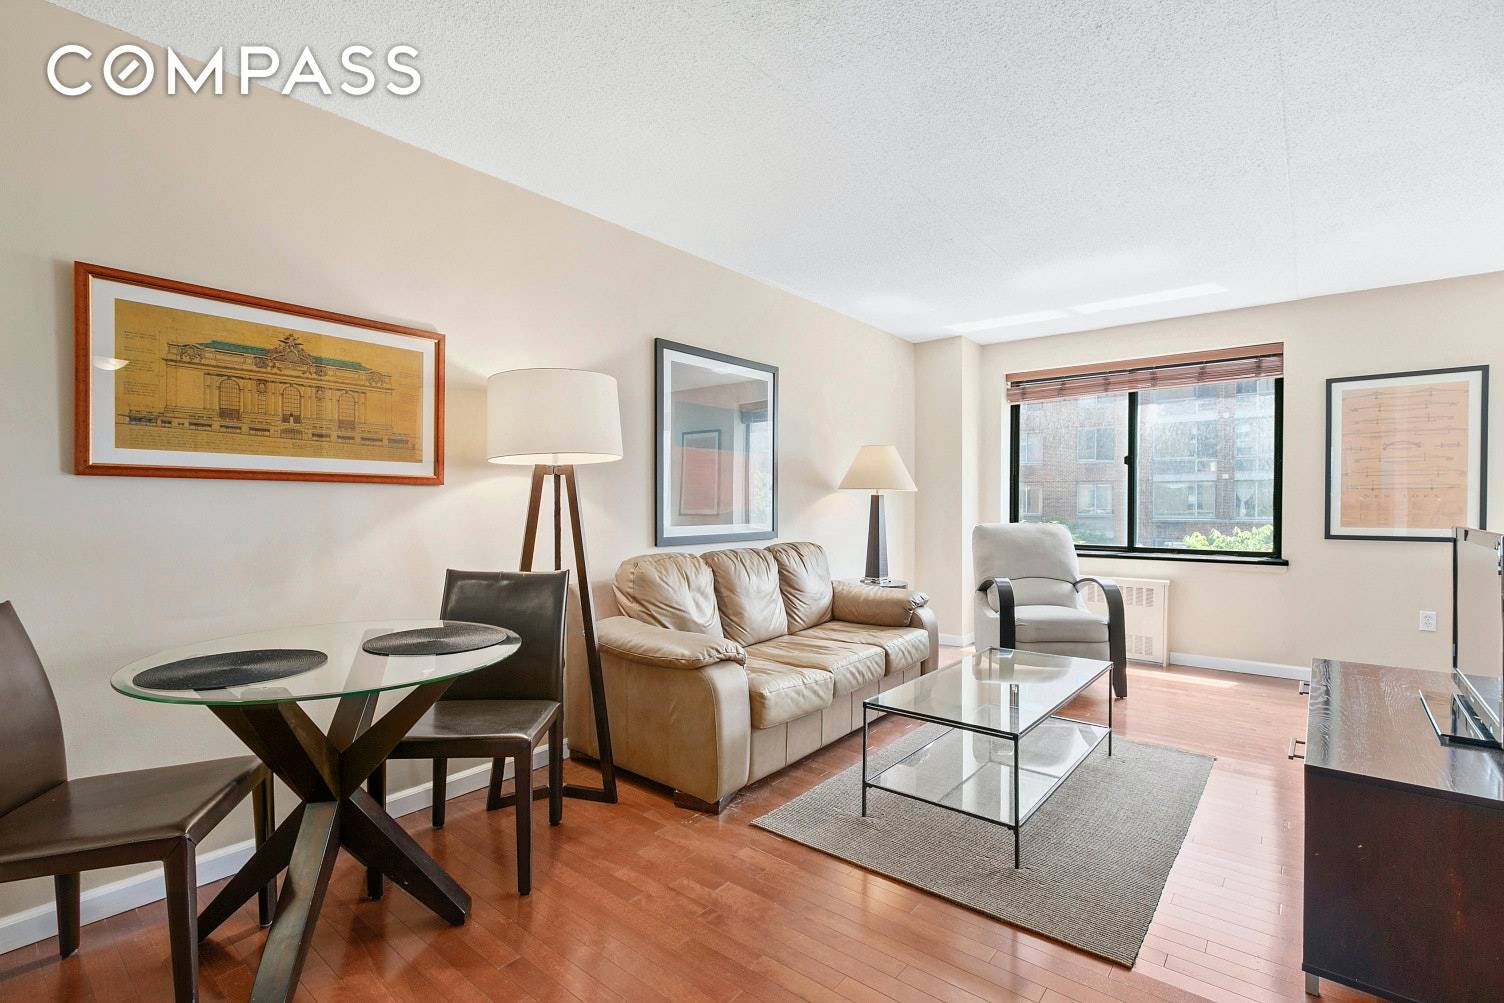 Beautifully furnished alcove studio junior 1 bed in the heart of Battery Park City, just steps away from the financial district.